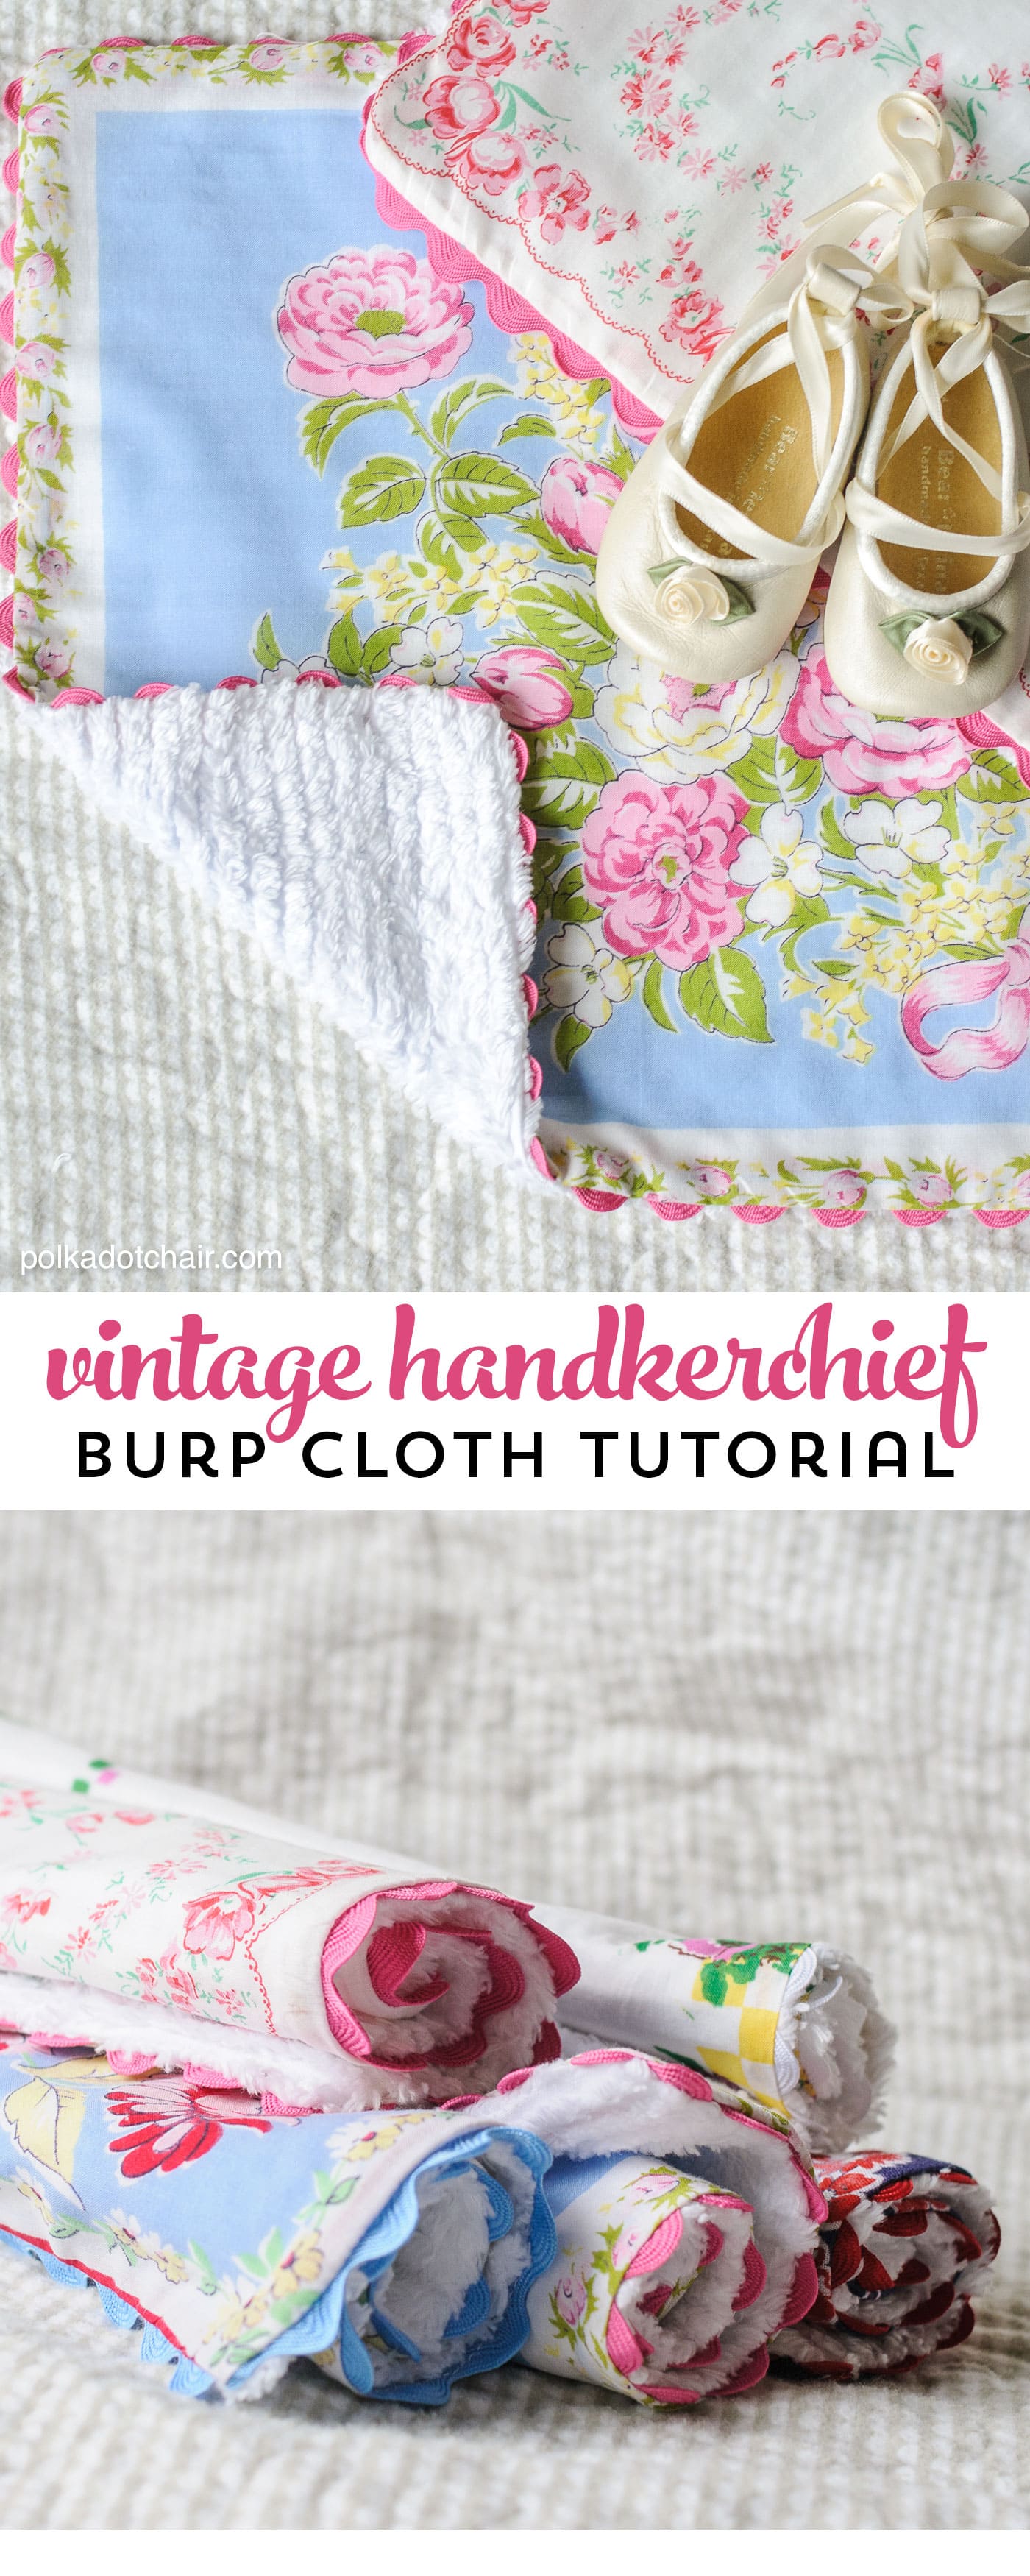 Sewing tutorial showing how to make baby burp cloths from vintage hankies 